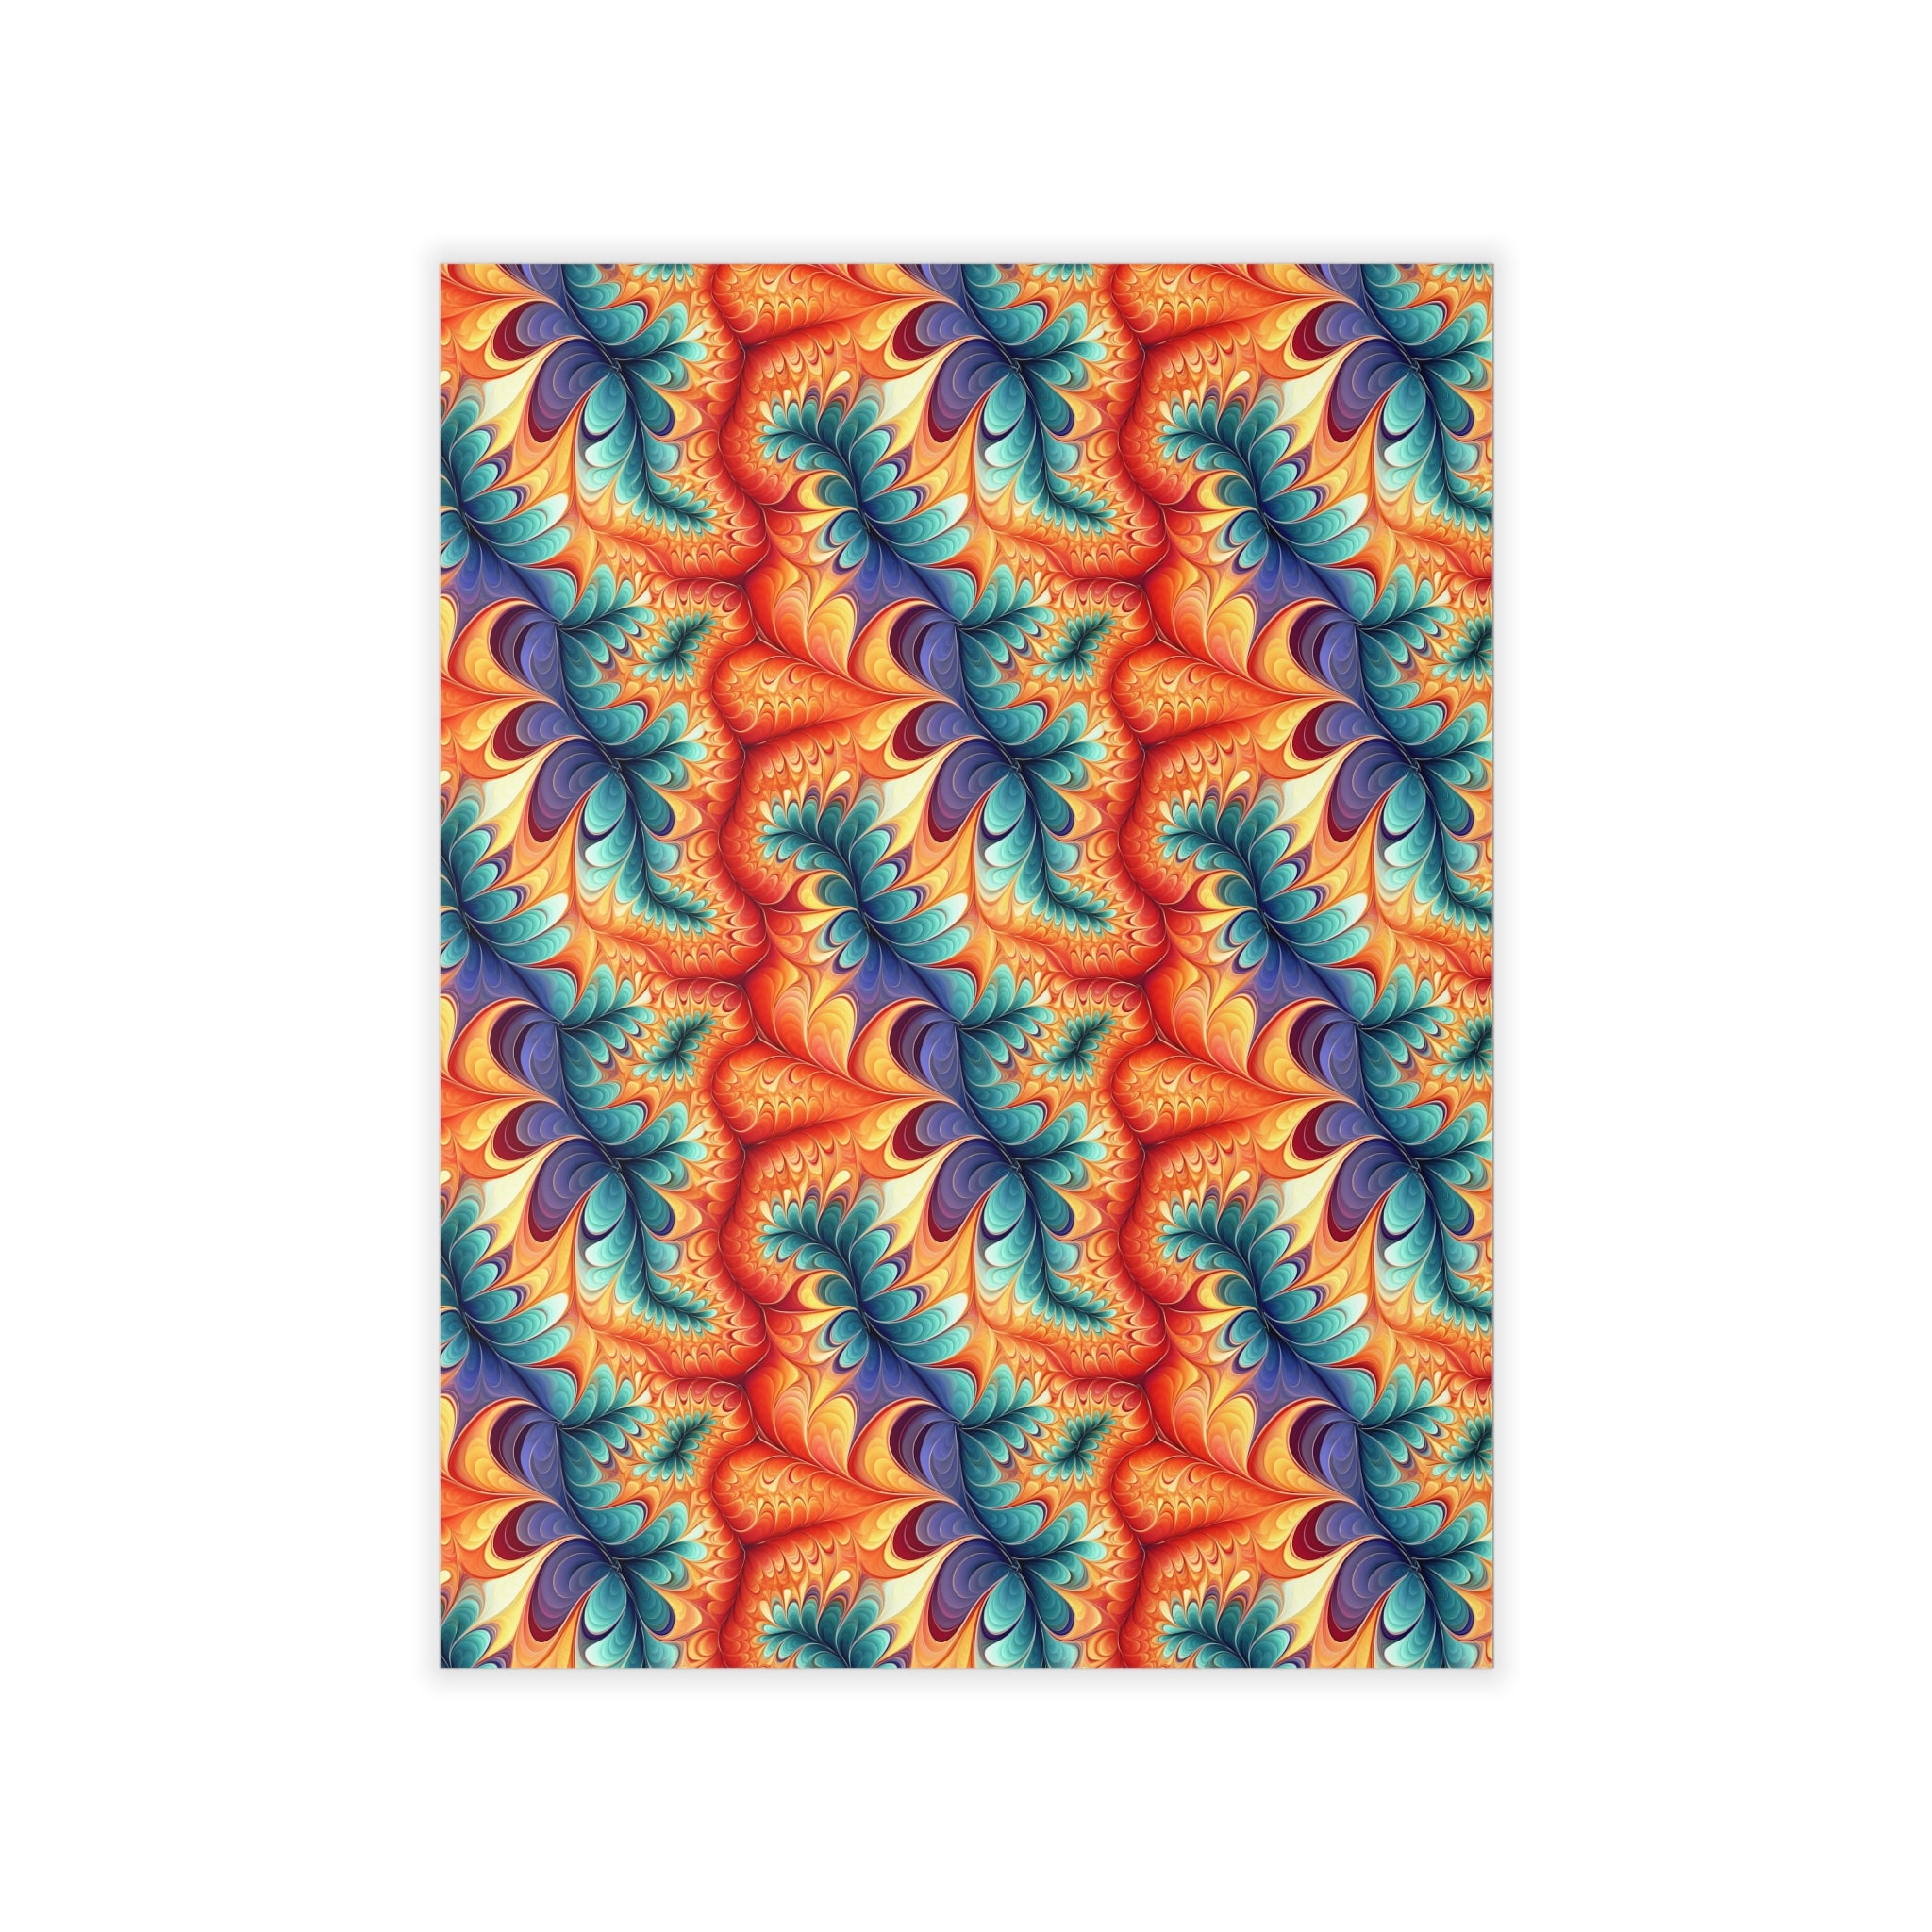 Wall Decals - Abstract Designs 06